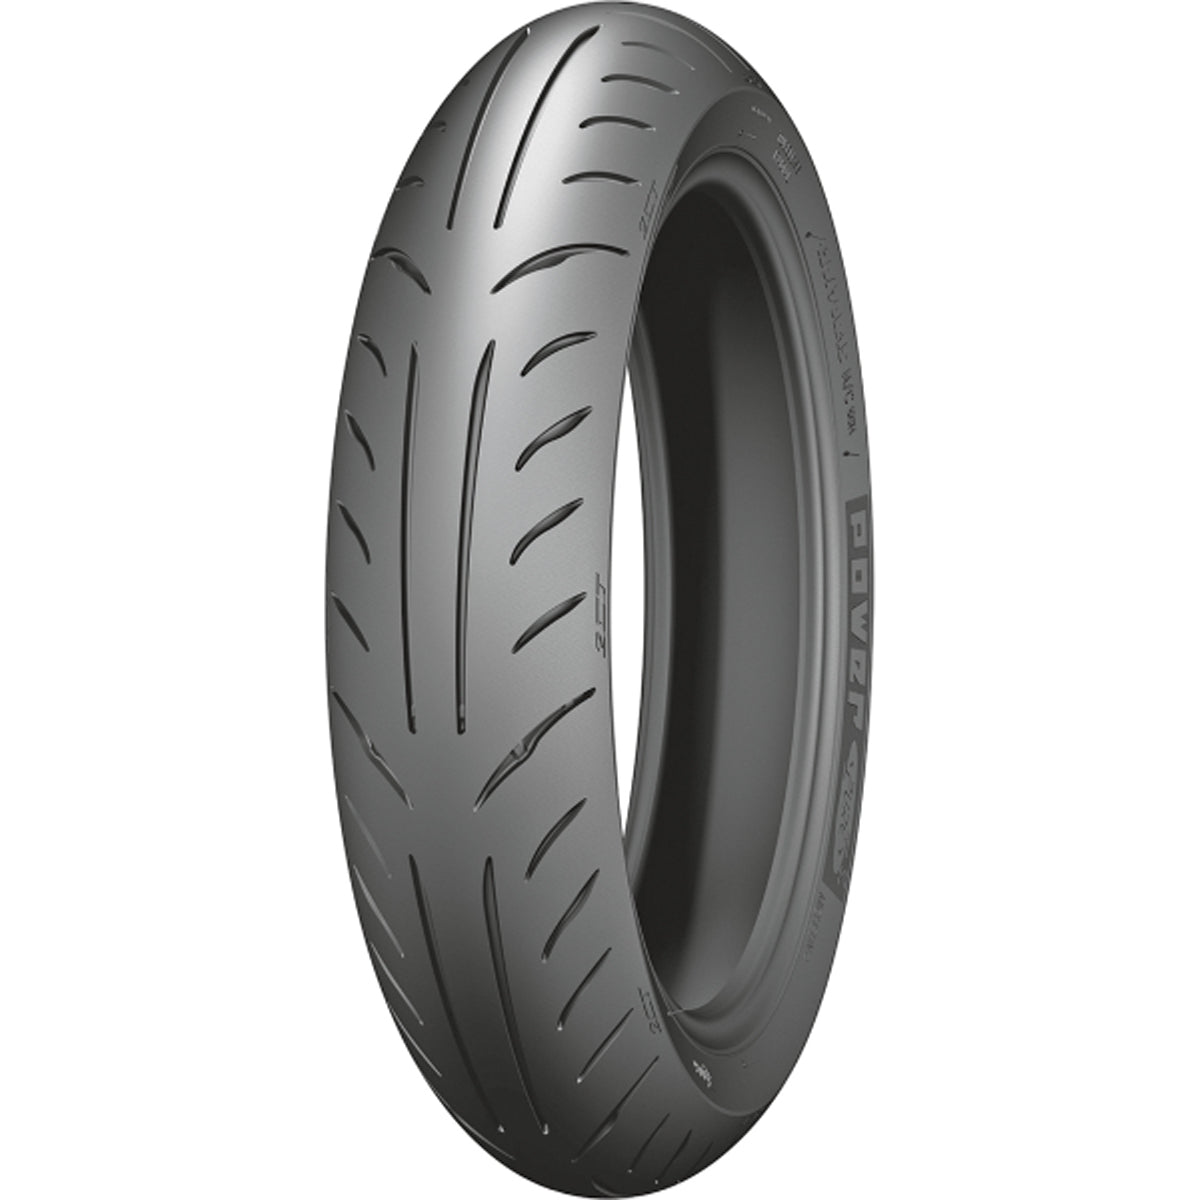 Michelin Power Pure SC 13" Front Cruiser Tires-0340